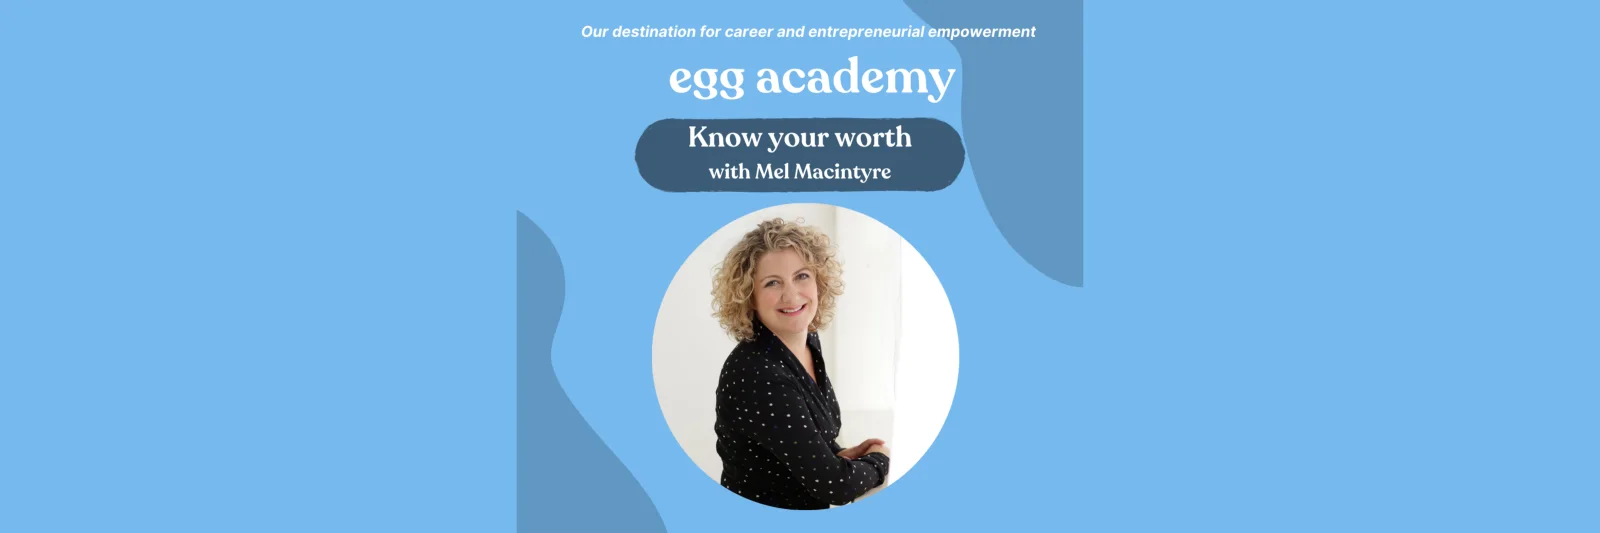 egg academy - Know your worth with Mel MacIntyre